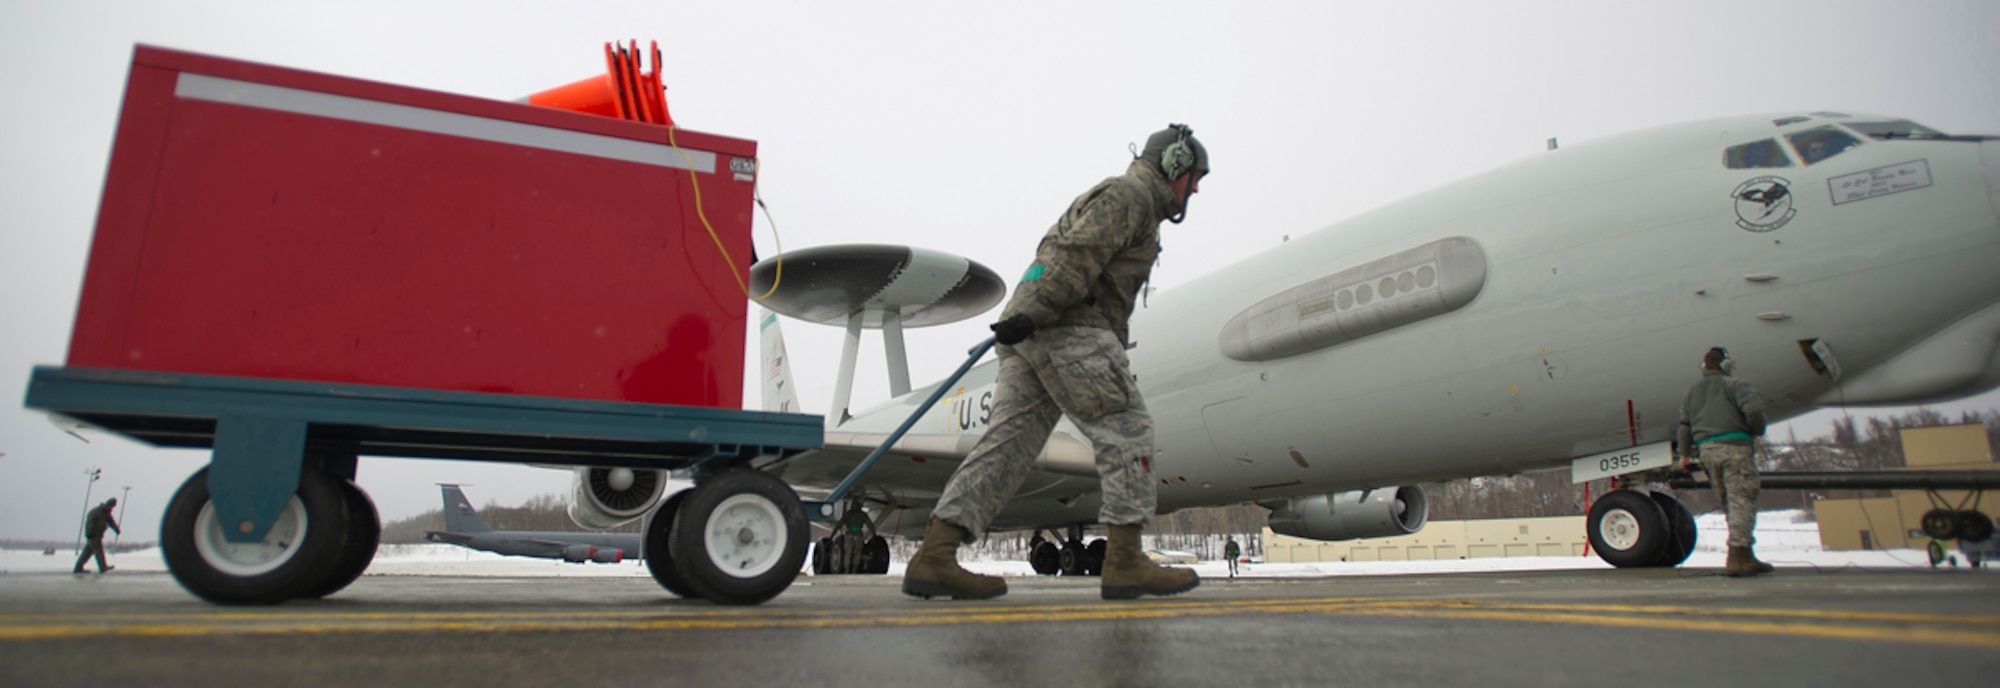 Air Force Staff Sgt. Brian Howard, assigned to the 962nd Aircraft Maintenance Unit, pulls a tool box as he prepares to perform maintenance on a E-3 Sentry Airborne Warning and Control System aircraft after a mission on Joint Base Elmendorf-Richardson, Alaska, Wednesday, March 17, 2014. (U.S. Air Force photo by Justin Connaher/Released)